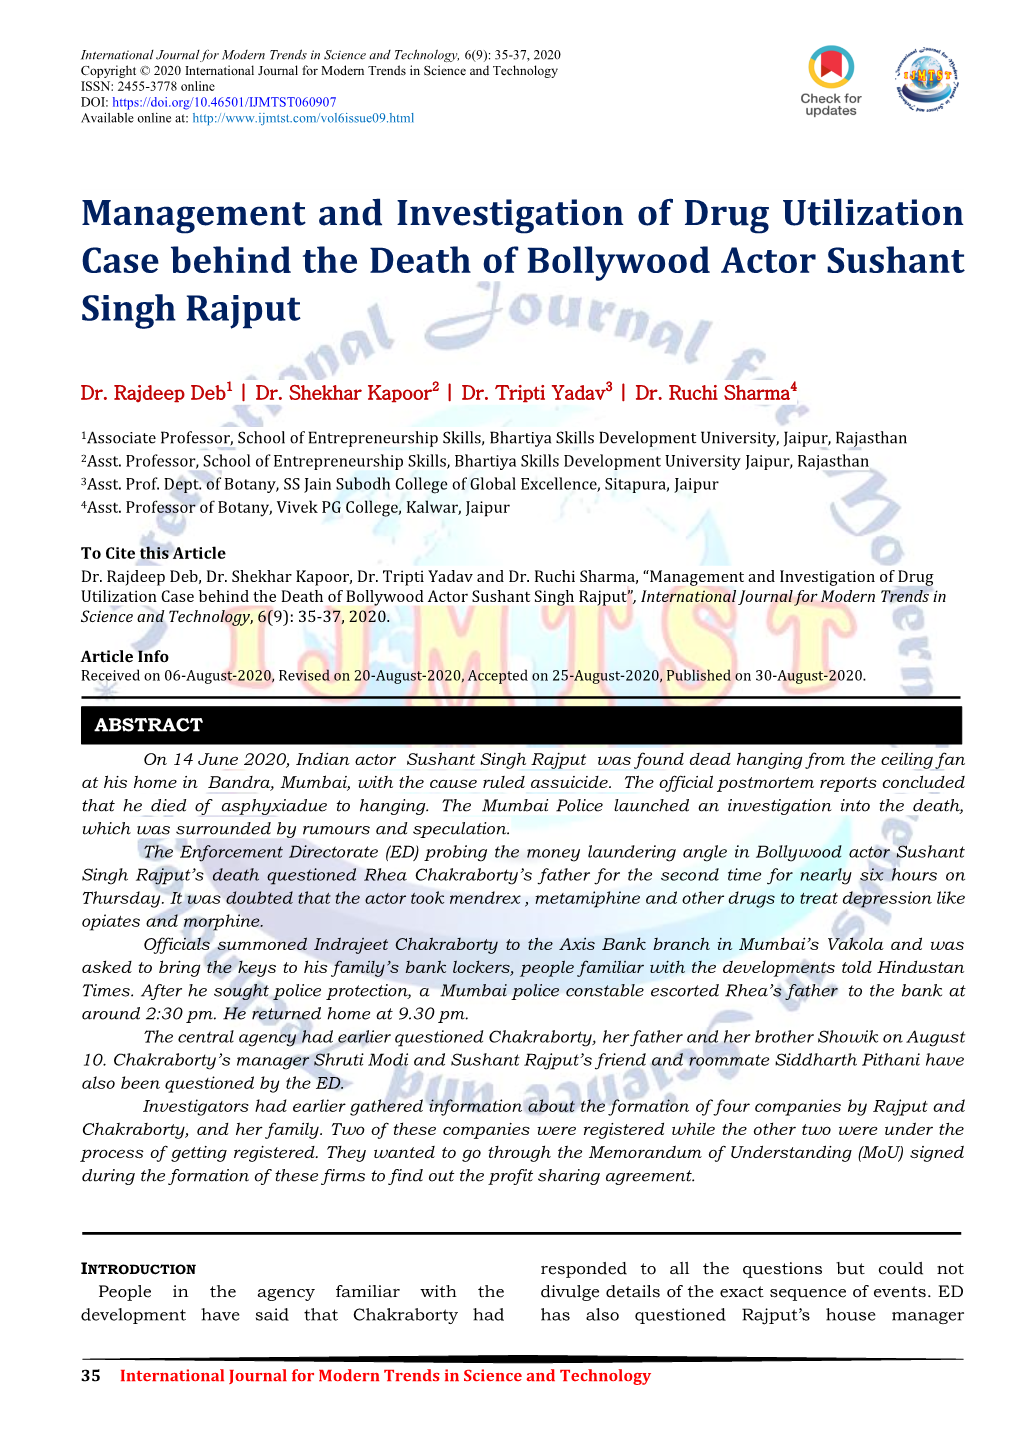 Management and Investigation of Drug Utilization Case Behind the Death of Bollywood Actor Sushant Singh Rajput